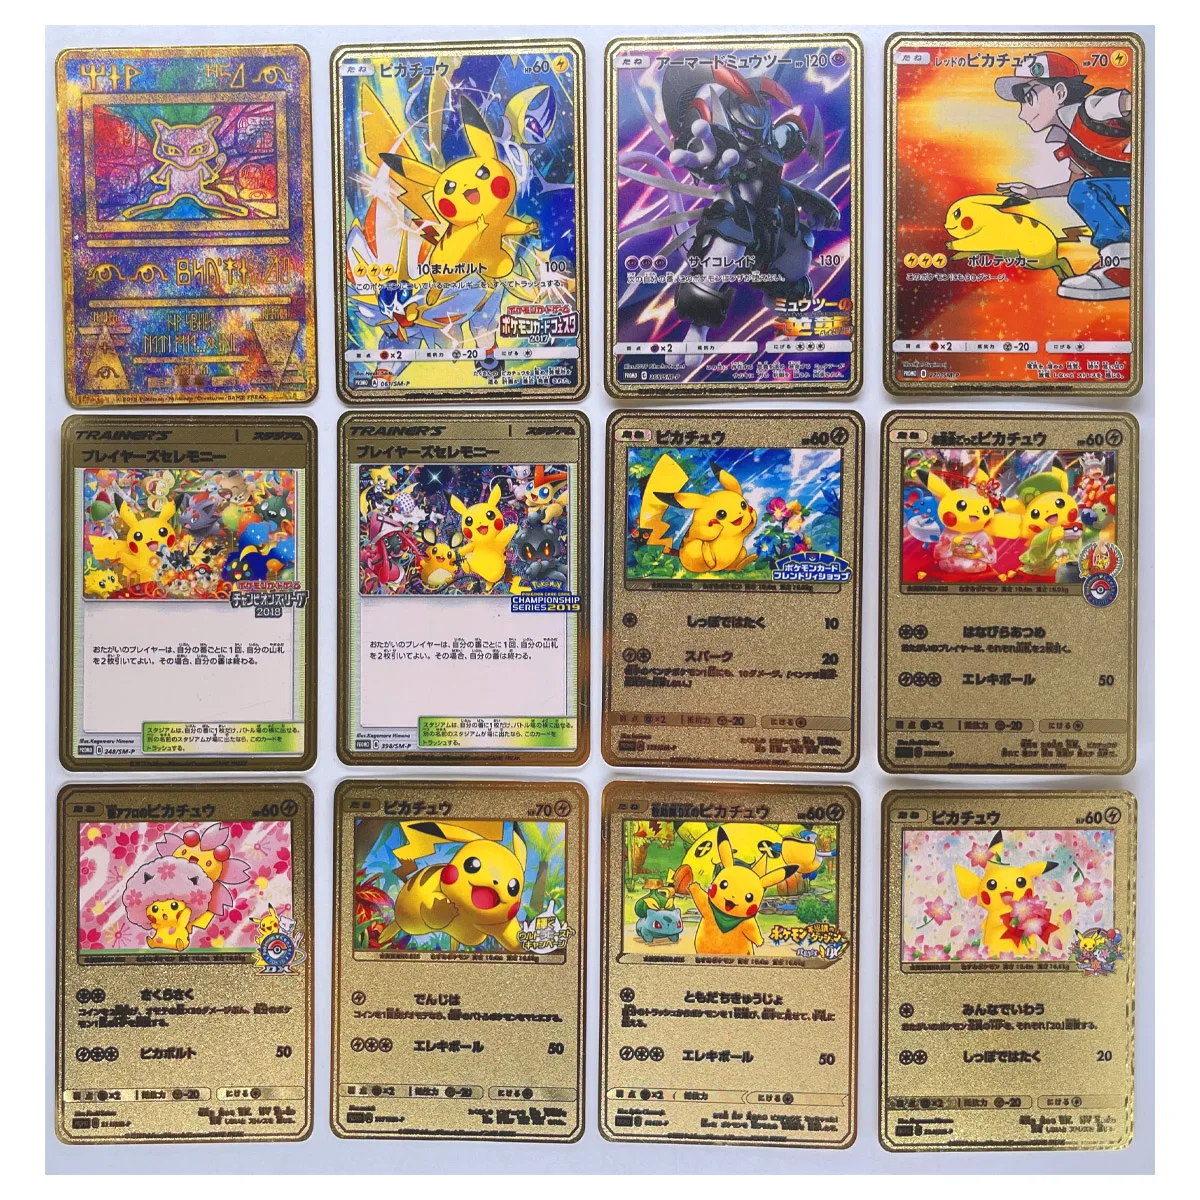 Pokemon 27 Styles Japanese Mew Mewtwo Gold Metal Card Super Game Hobbies Action Toy Figures Cards Toys for Children Gift